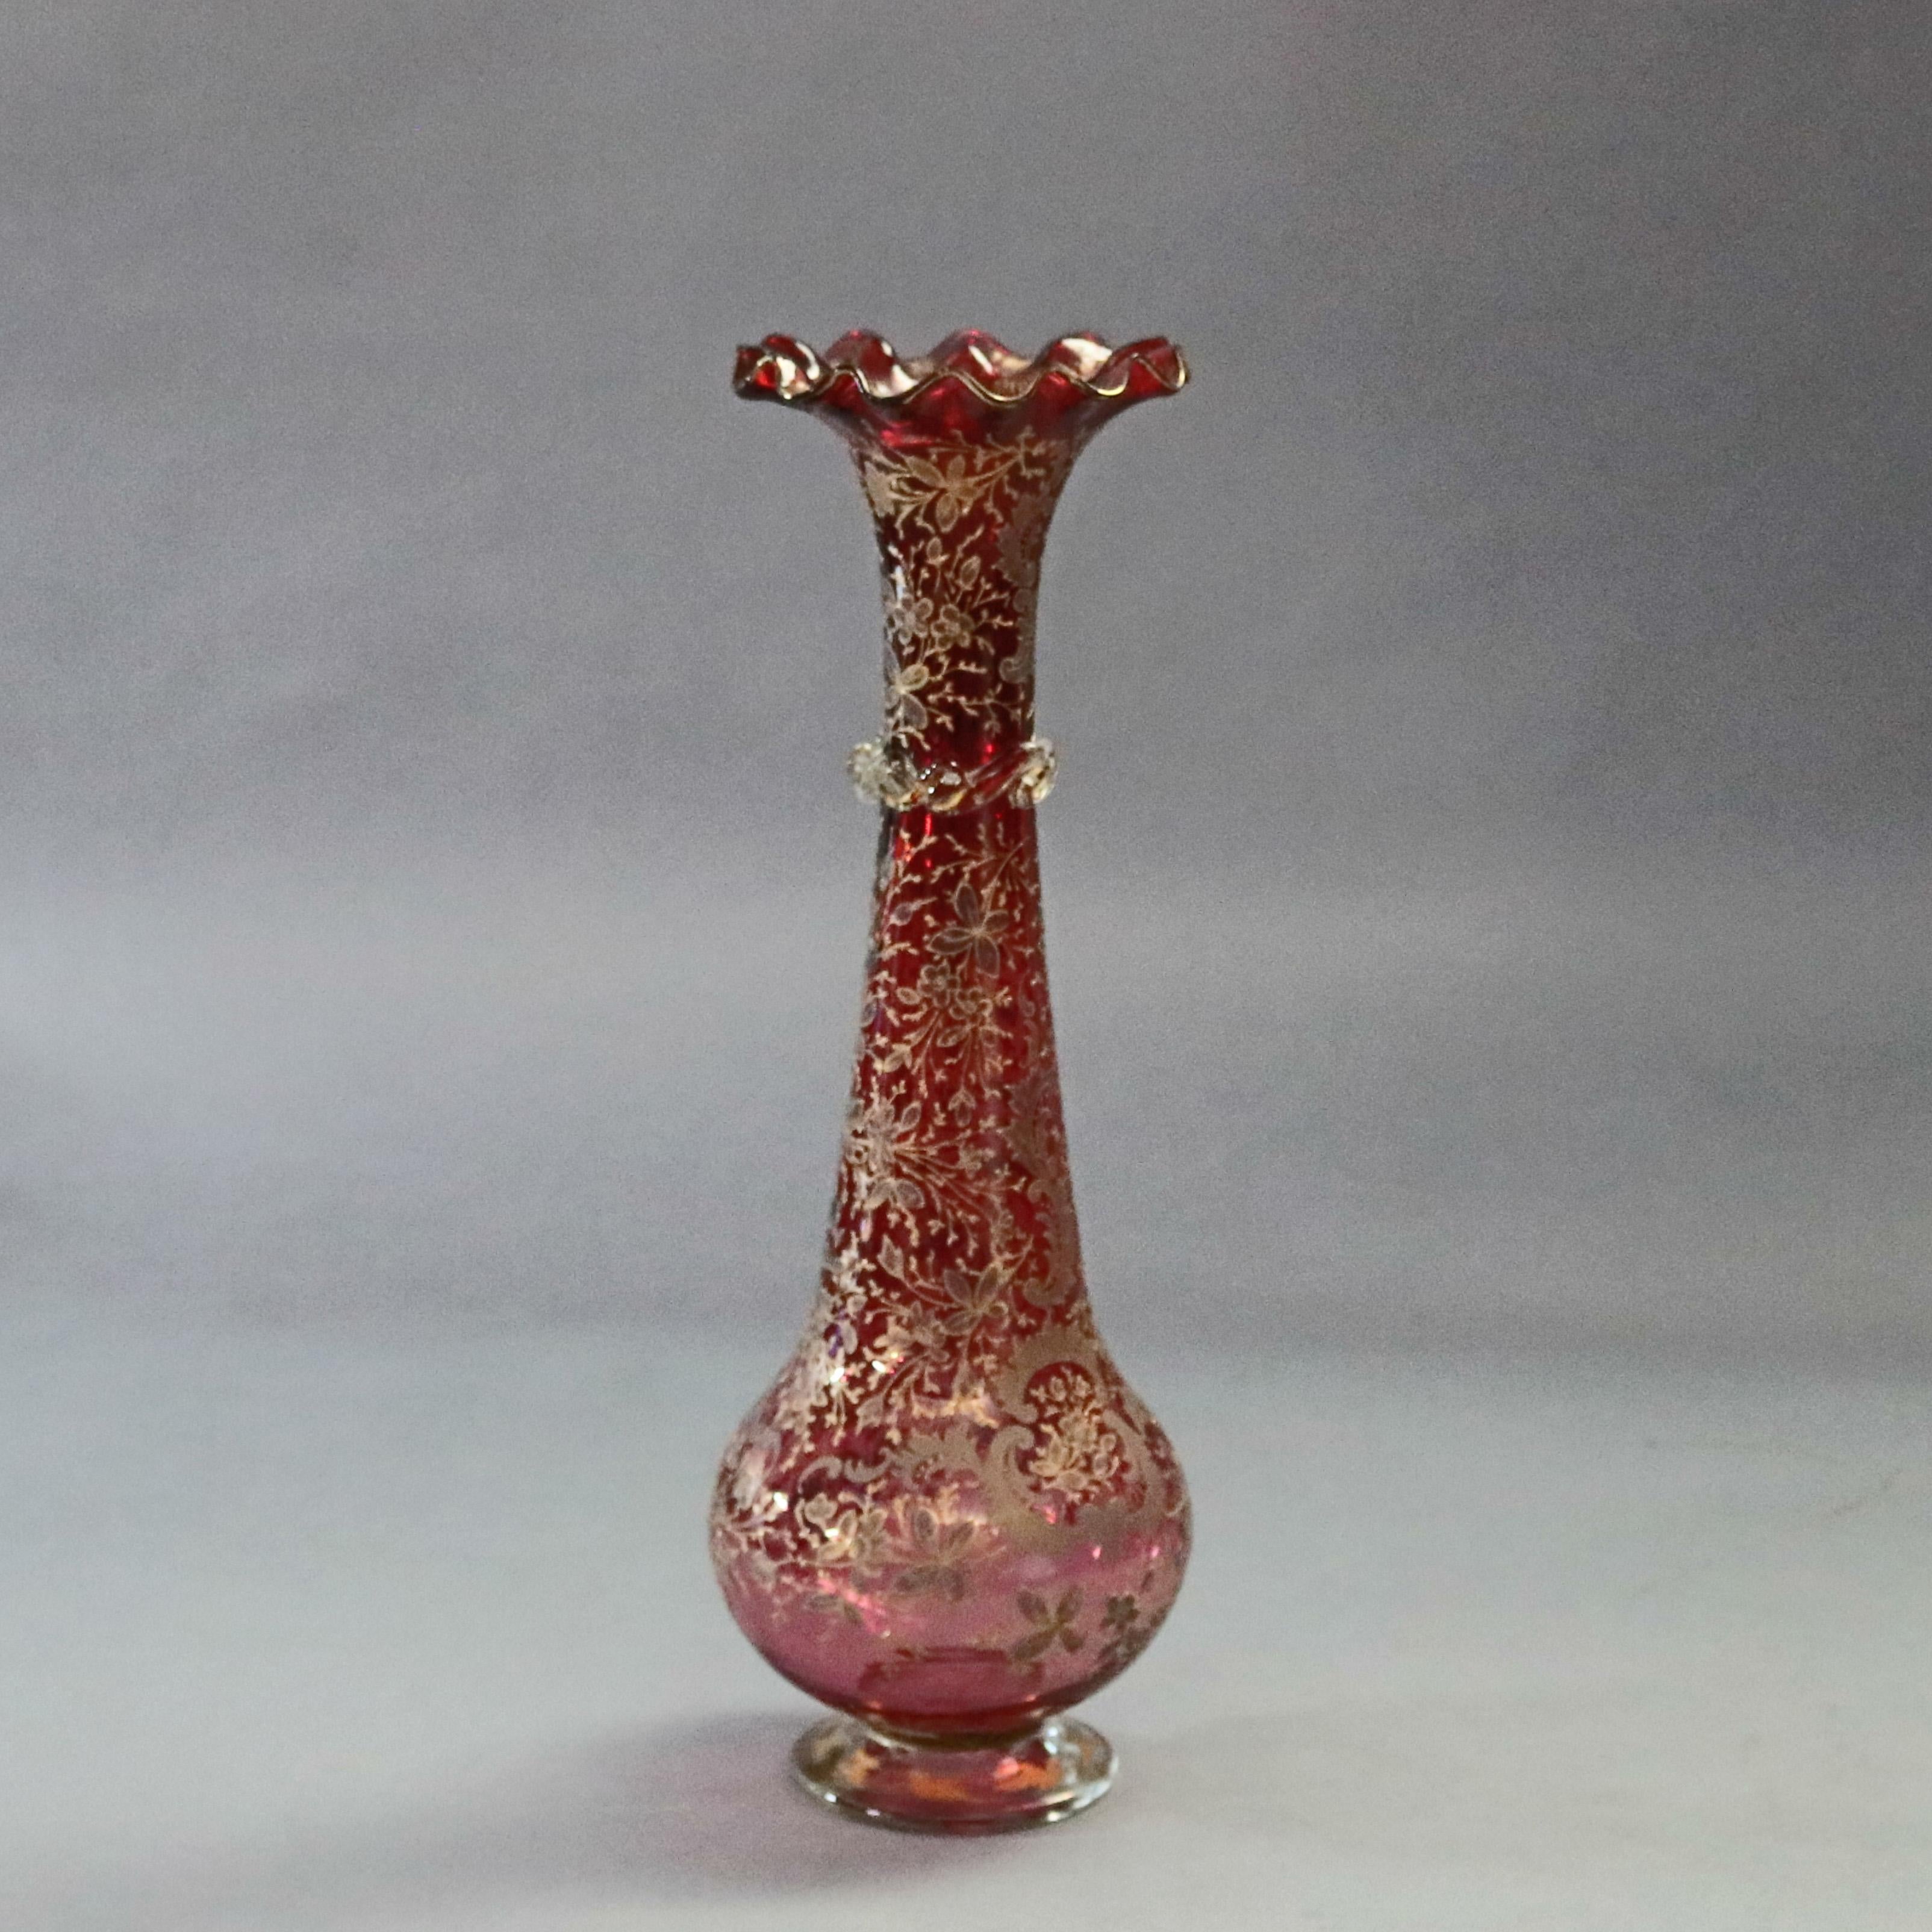 A Bohemian ruby glass vase offers mouth blown genie bottle form with foot, ruffled rim and collar and having allover gilt foliate and scroll Moorish design and open pontil, circa 1880

***DELIVERY NOTICE – Due to COVID-19 we are employing NO-CONTACT